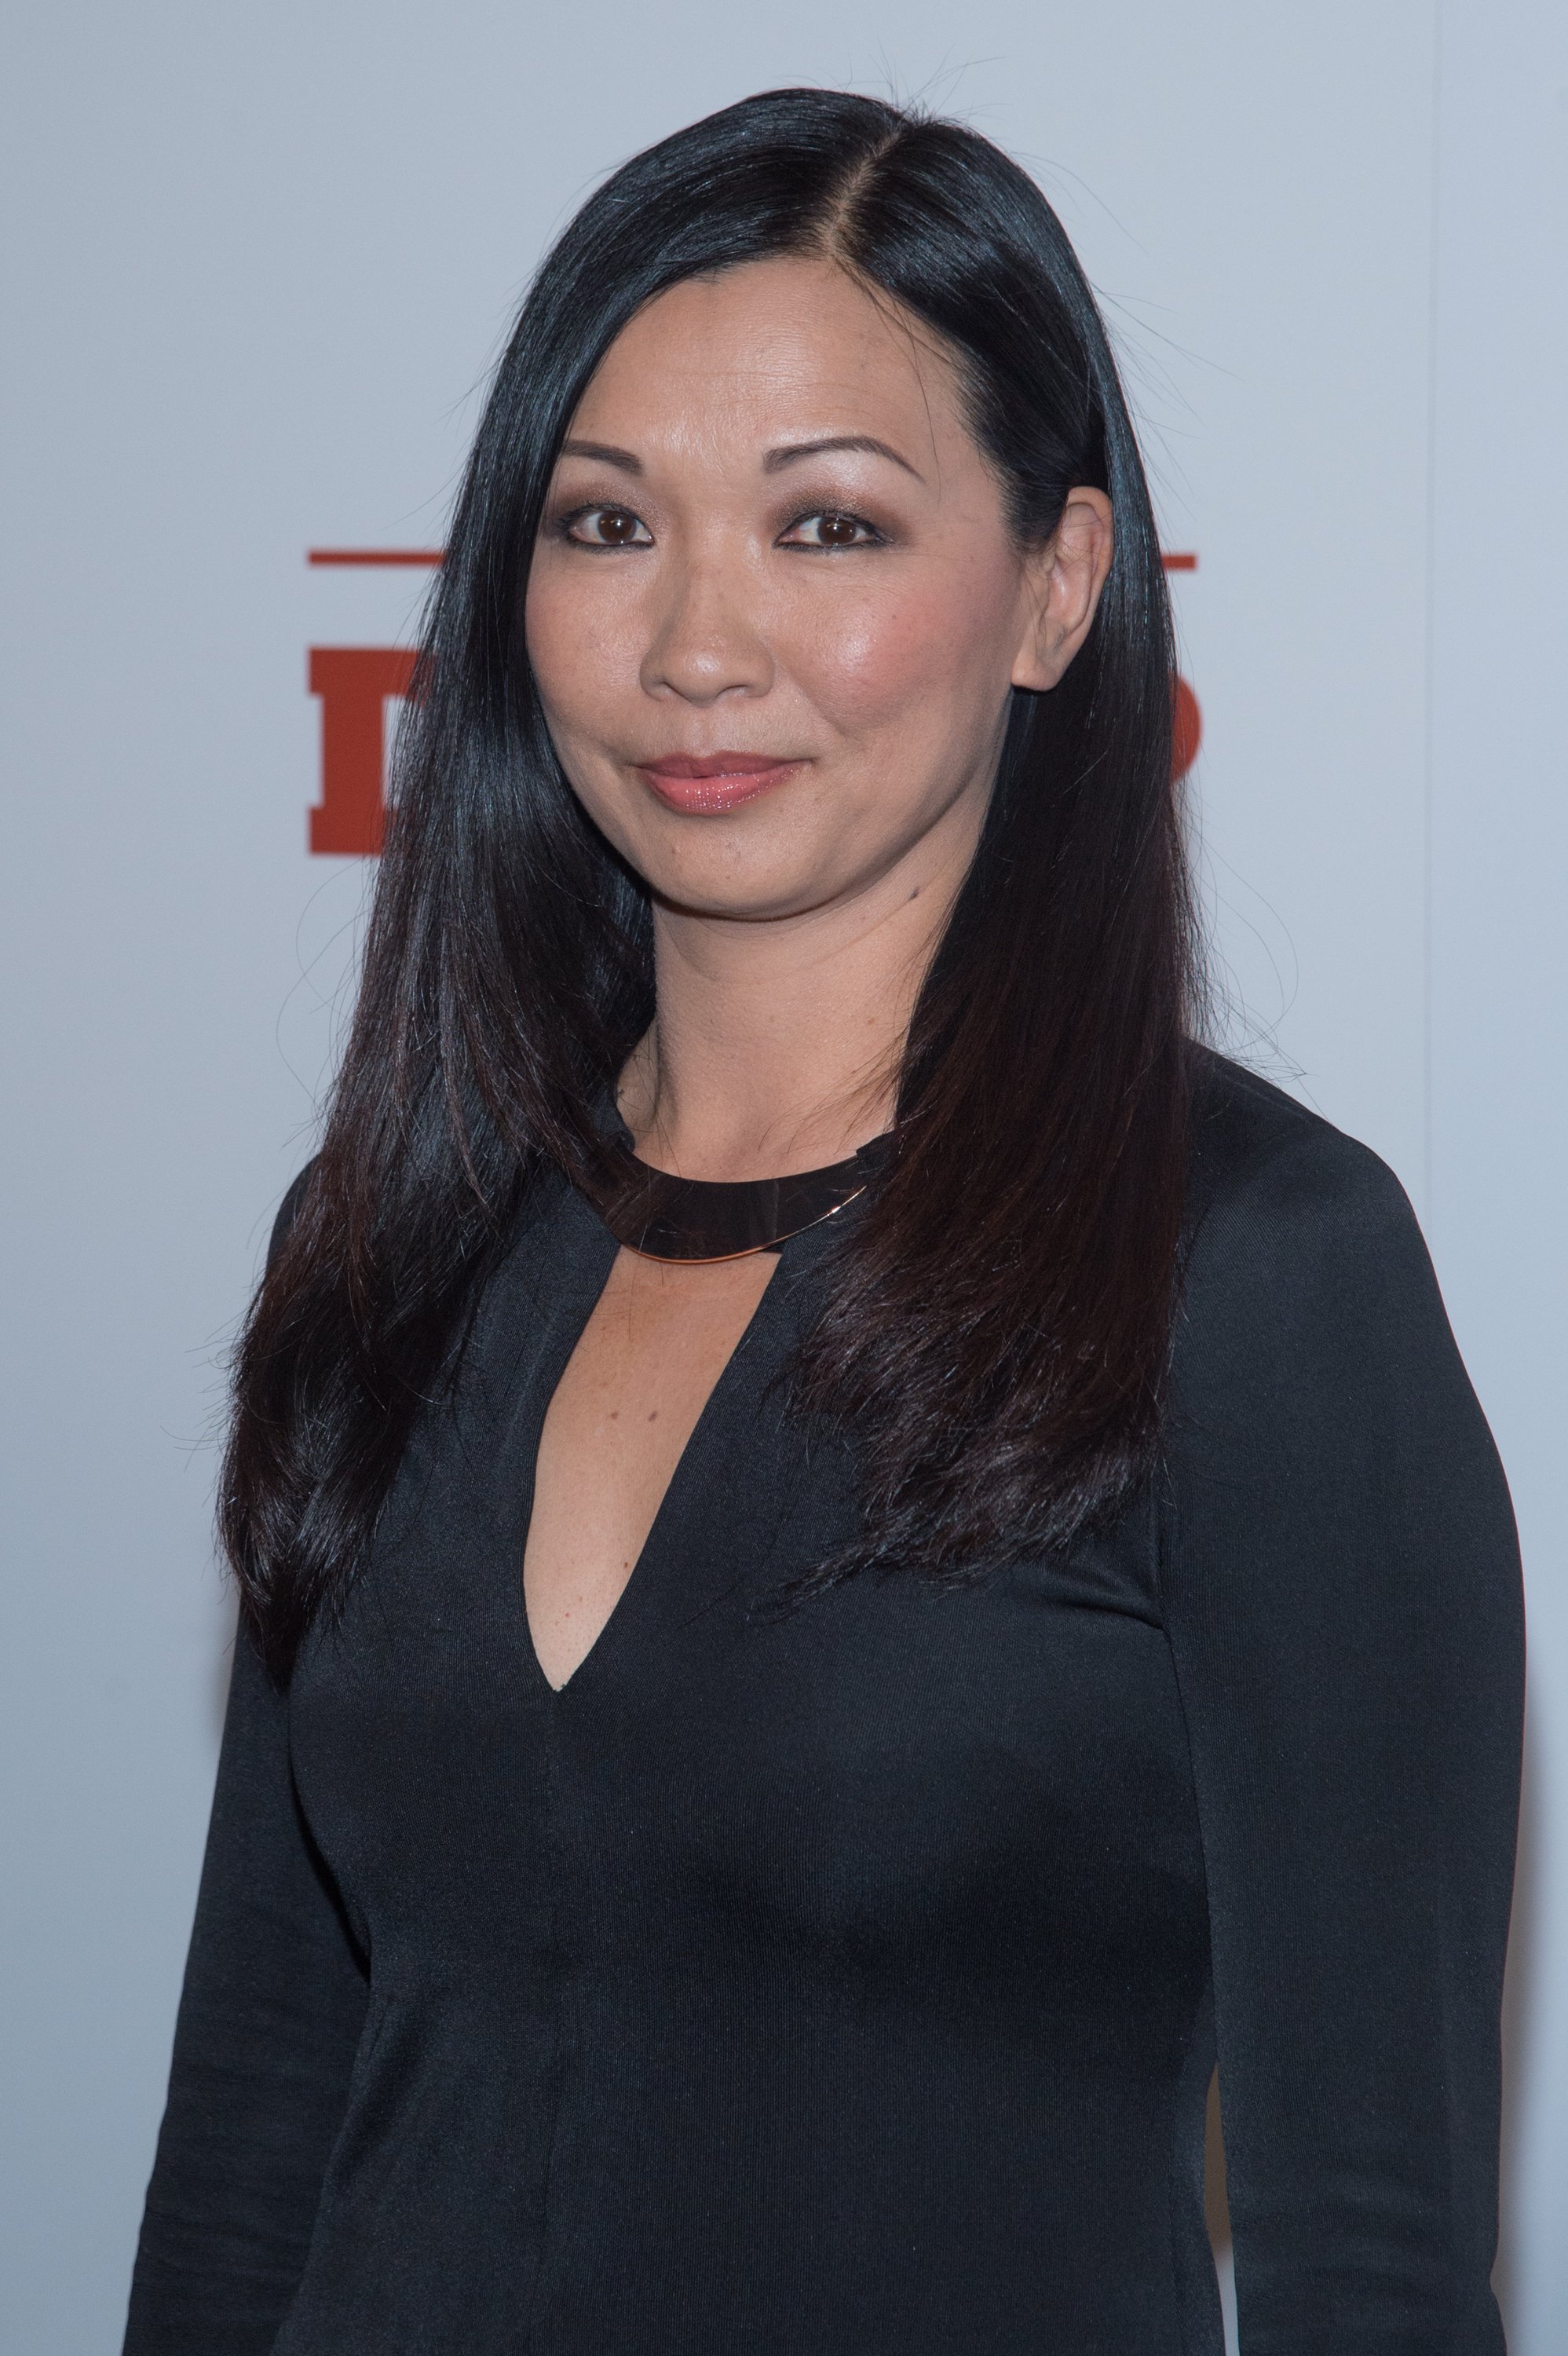 Deborah Lin attends "The Drop" Premiere at the Sunshine Cinema on September 8, 2014, in New York City.  | Source: Getty Images